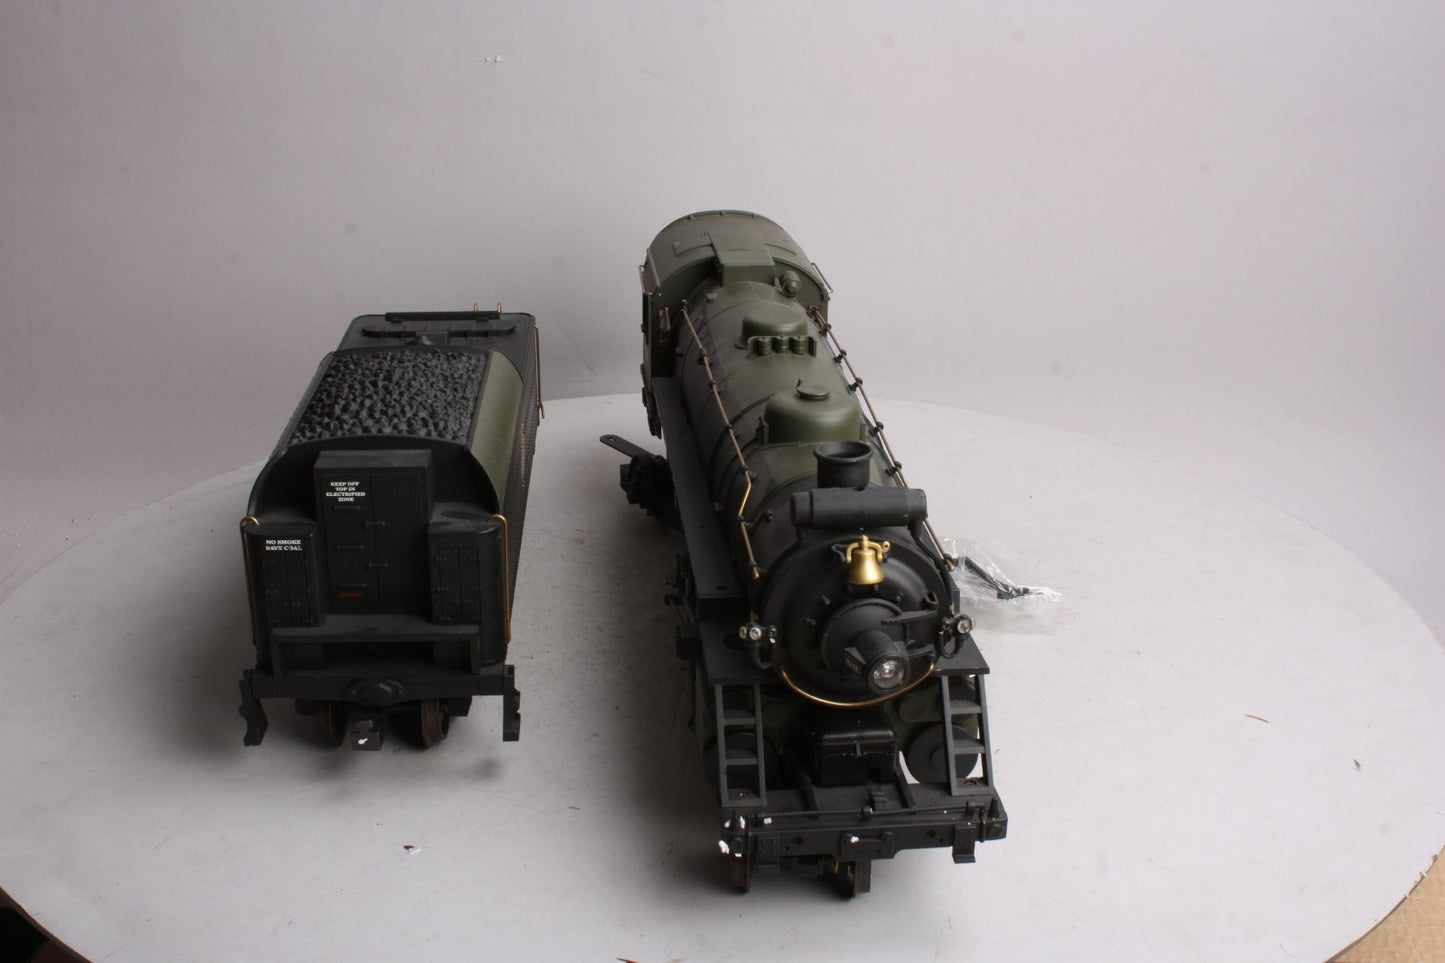 Aristo-Craft 21416 G Canadian National 4-6-2 Pacific Steam Loco & Tender